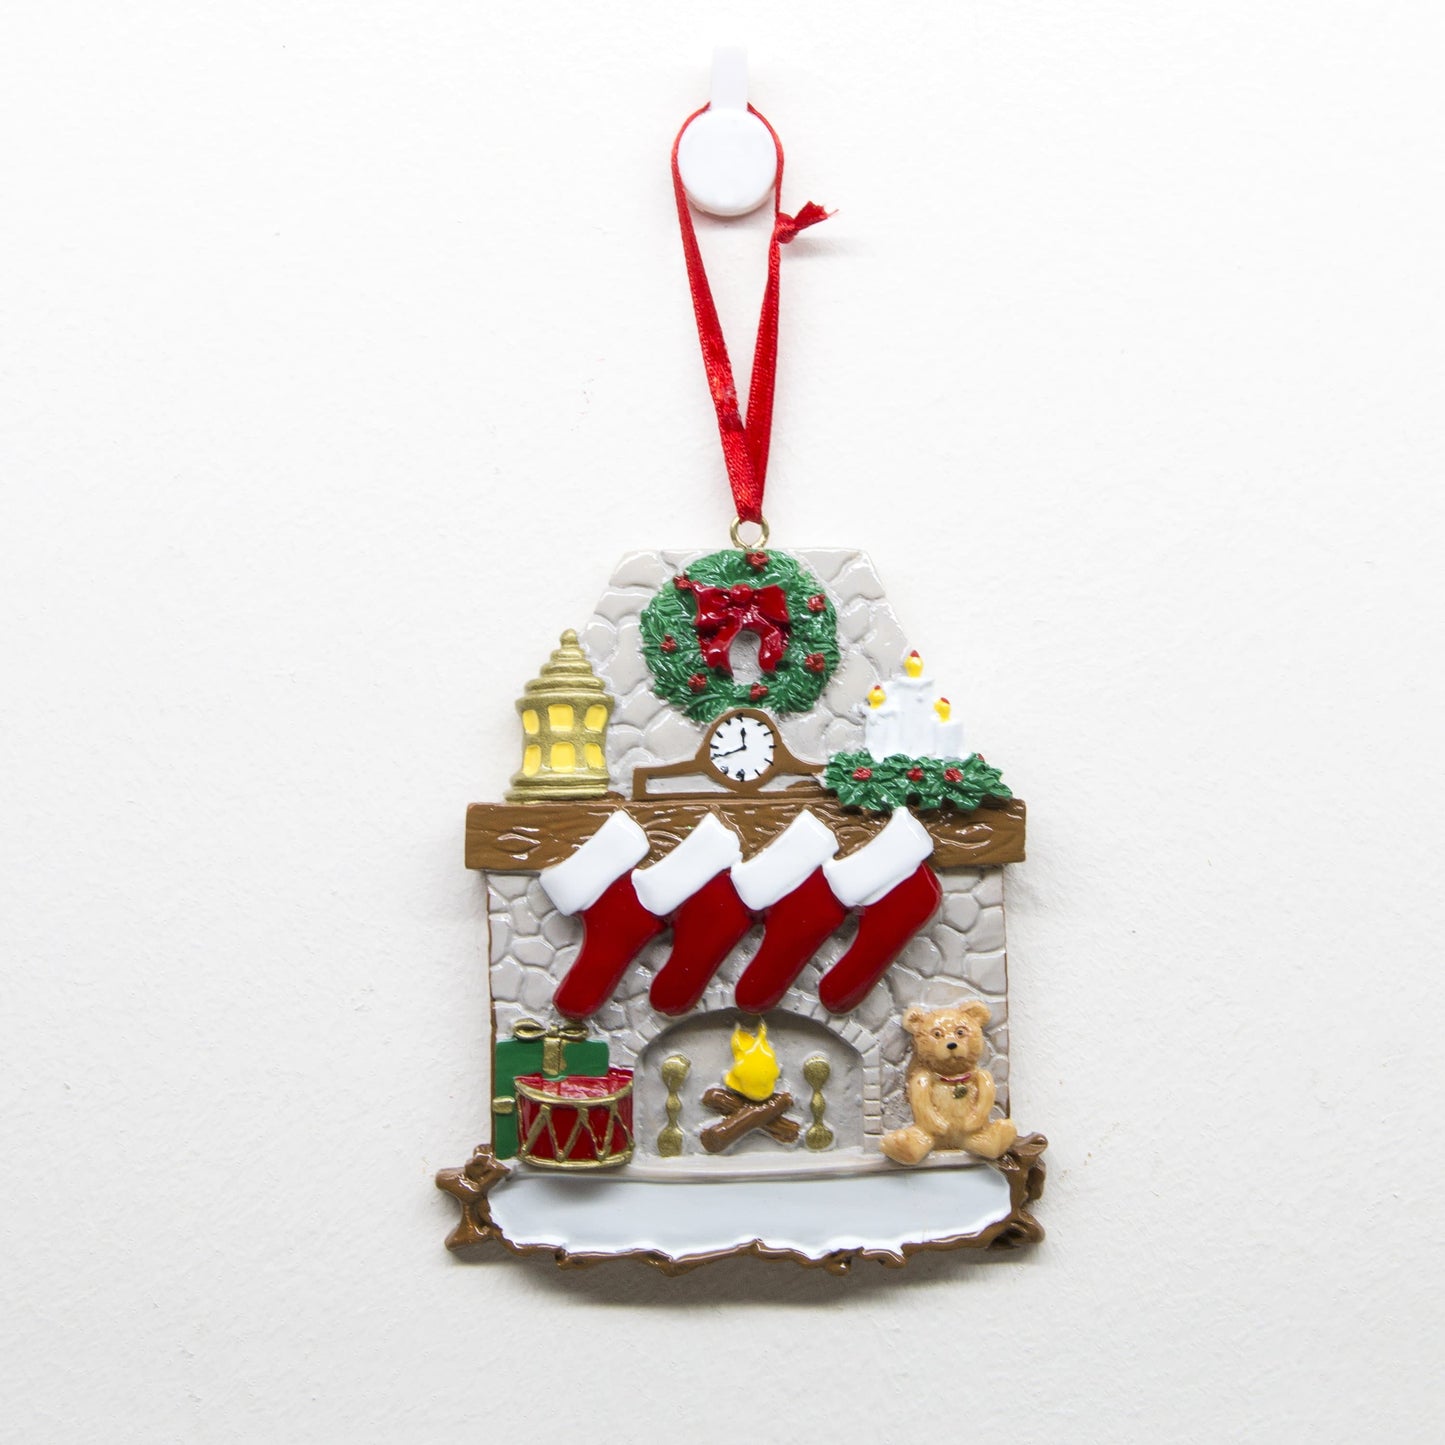 Fireplace Stockings - Christmas Ornament (Suitable for Personalization)